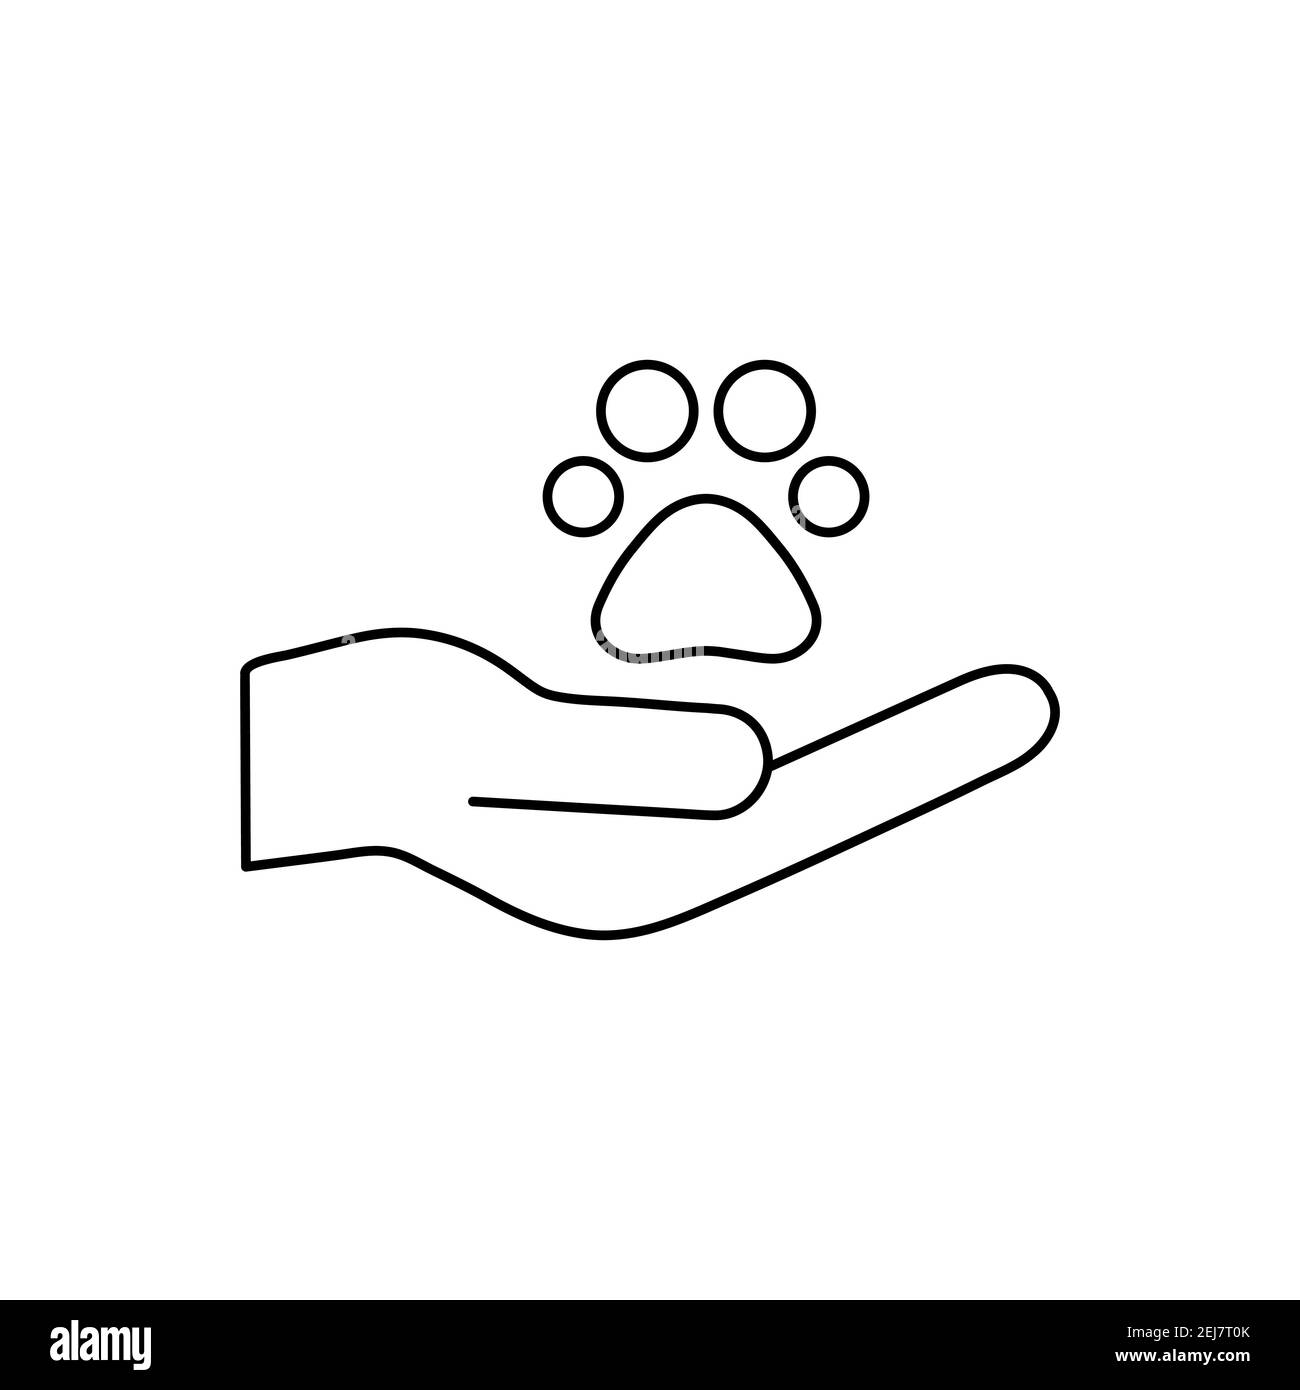 Animals help concept. Animal footprint paw and human hand. Voluntary line icon. Vector illustration isolated on white Stock Vector